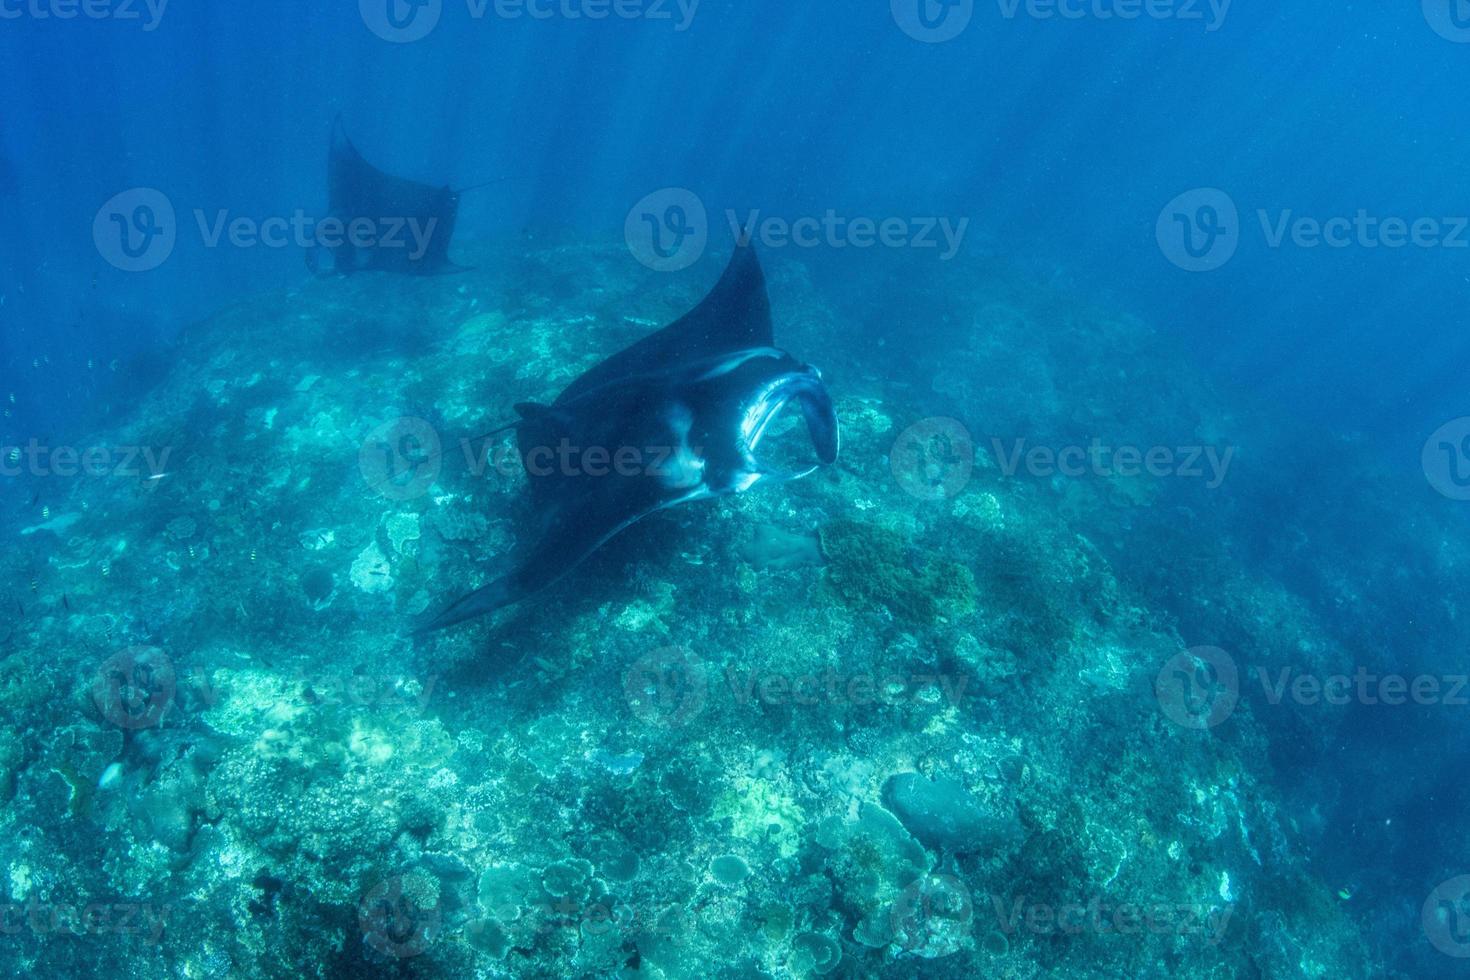 Manta Rays at the cleaning station photo